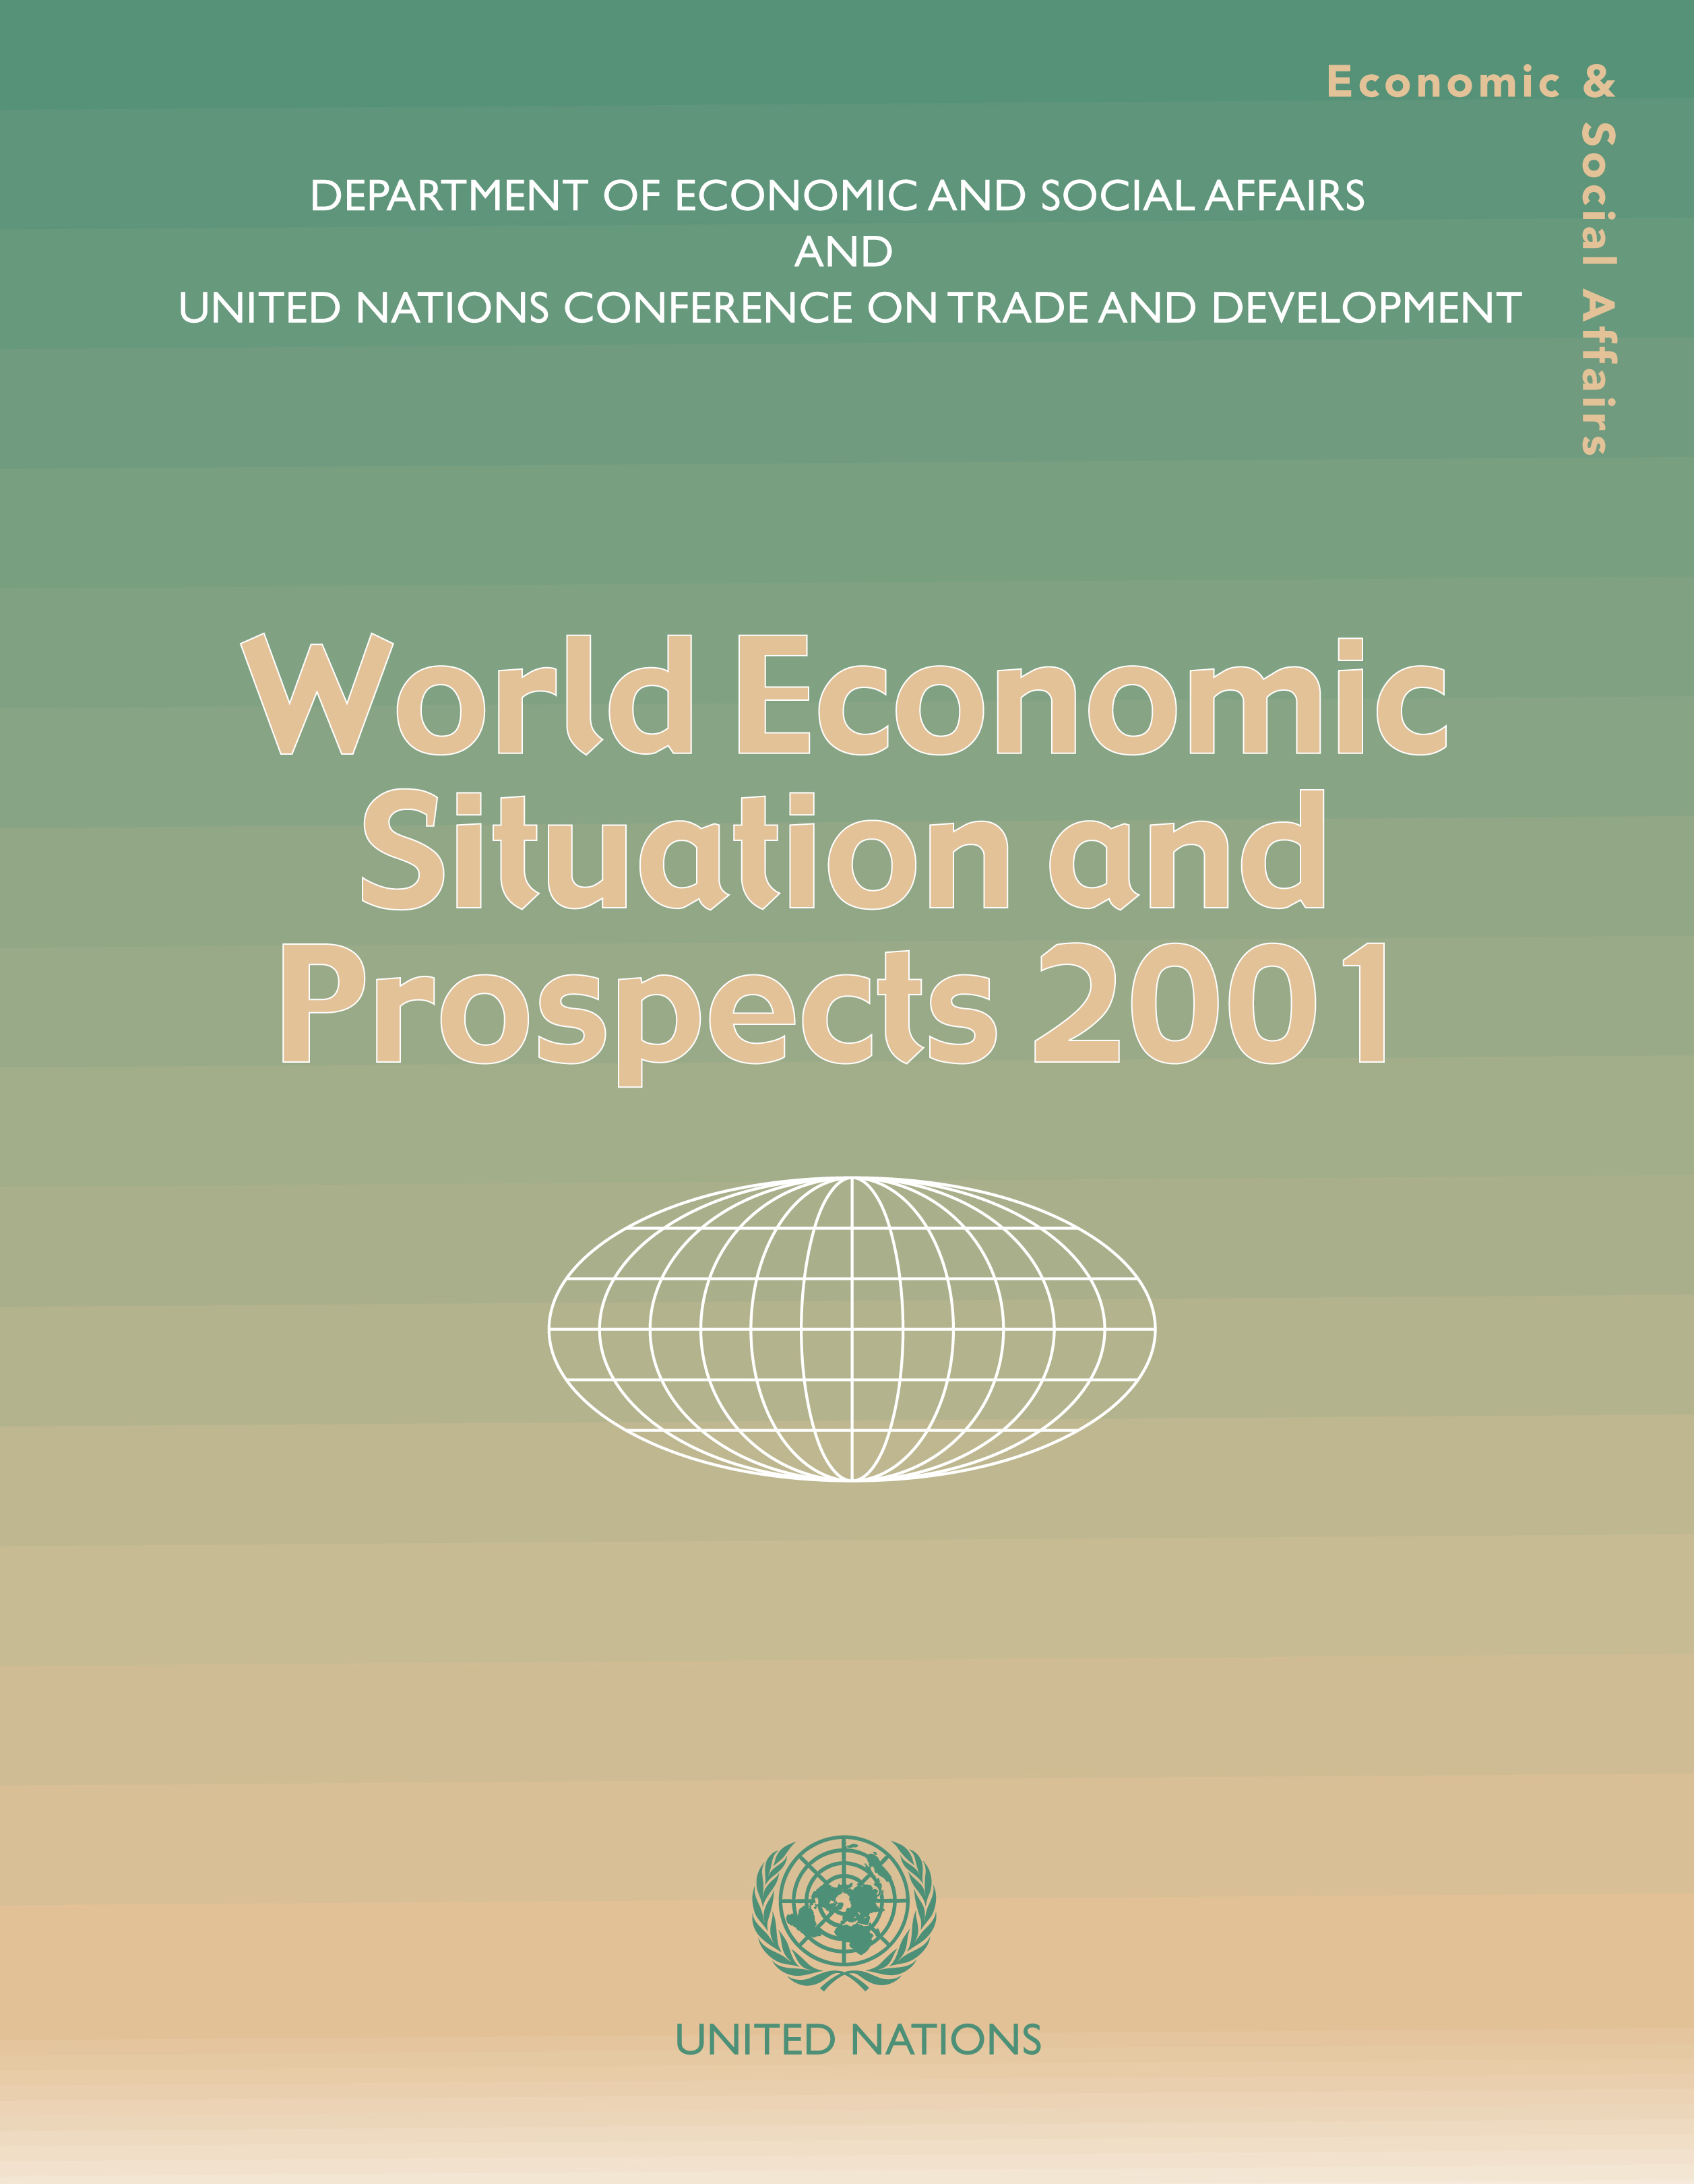 image of World Economic Situation and Prospects 2001